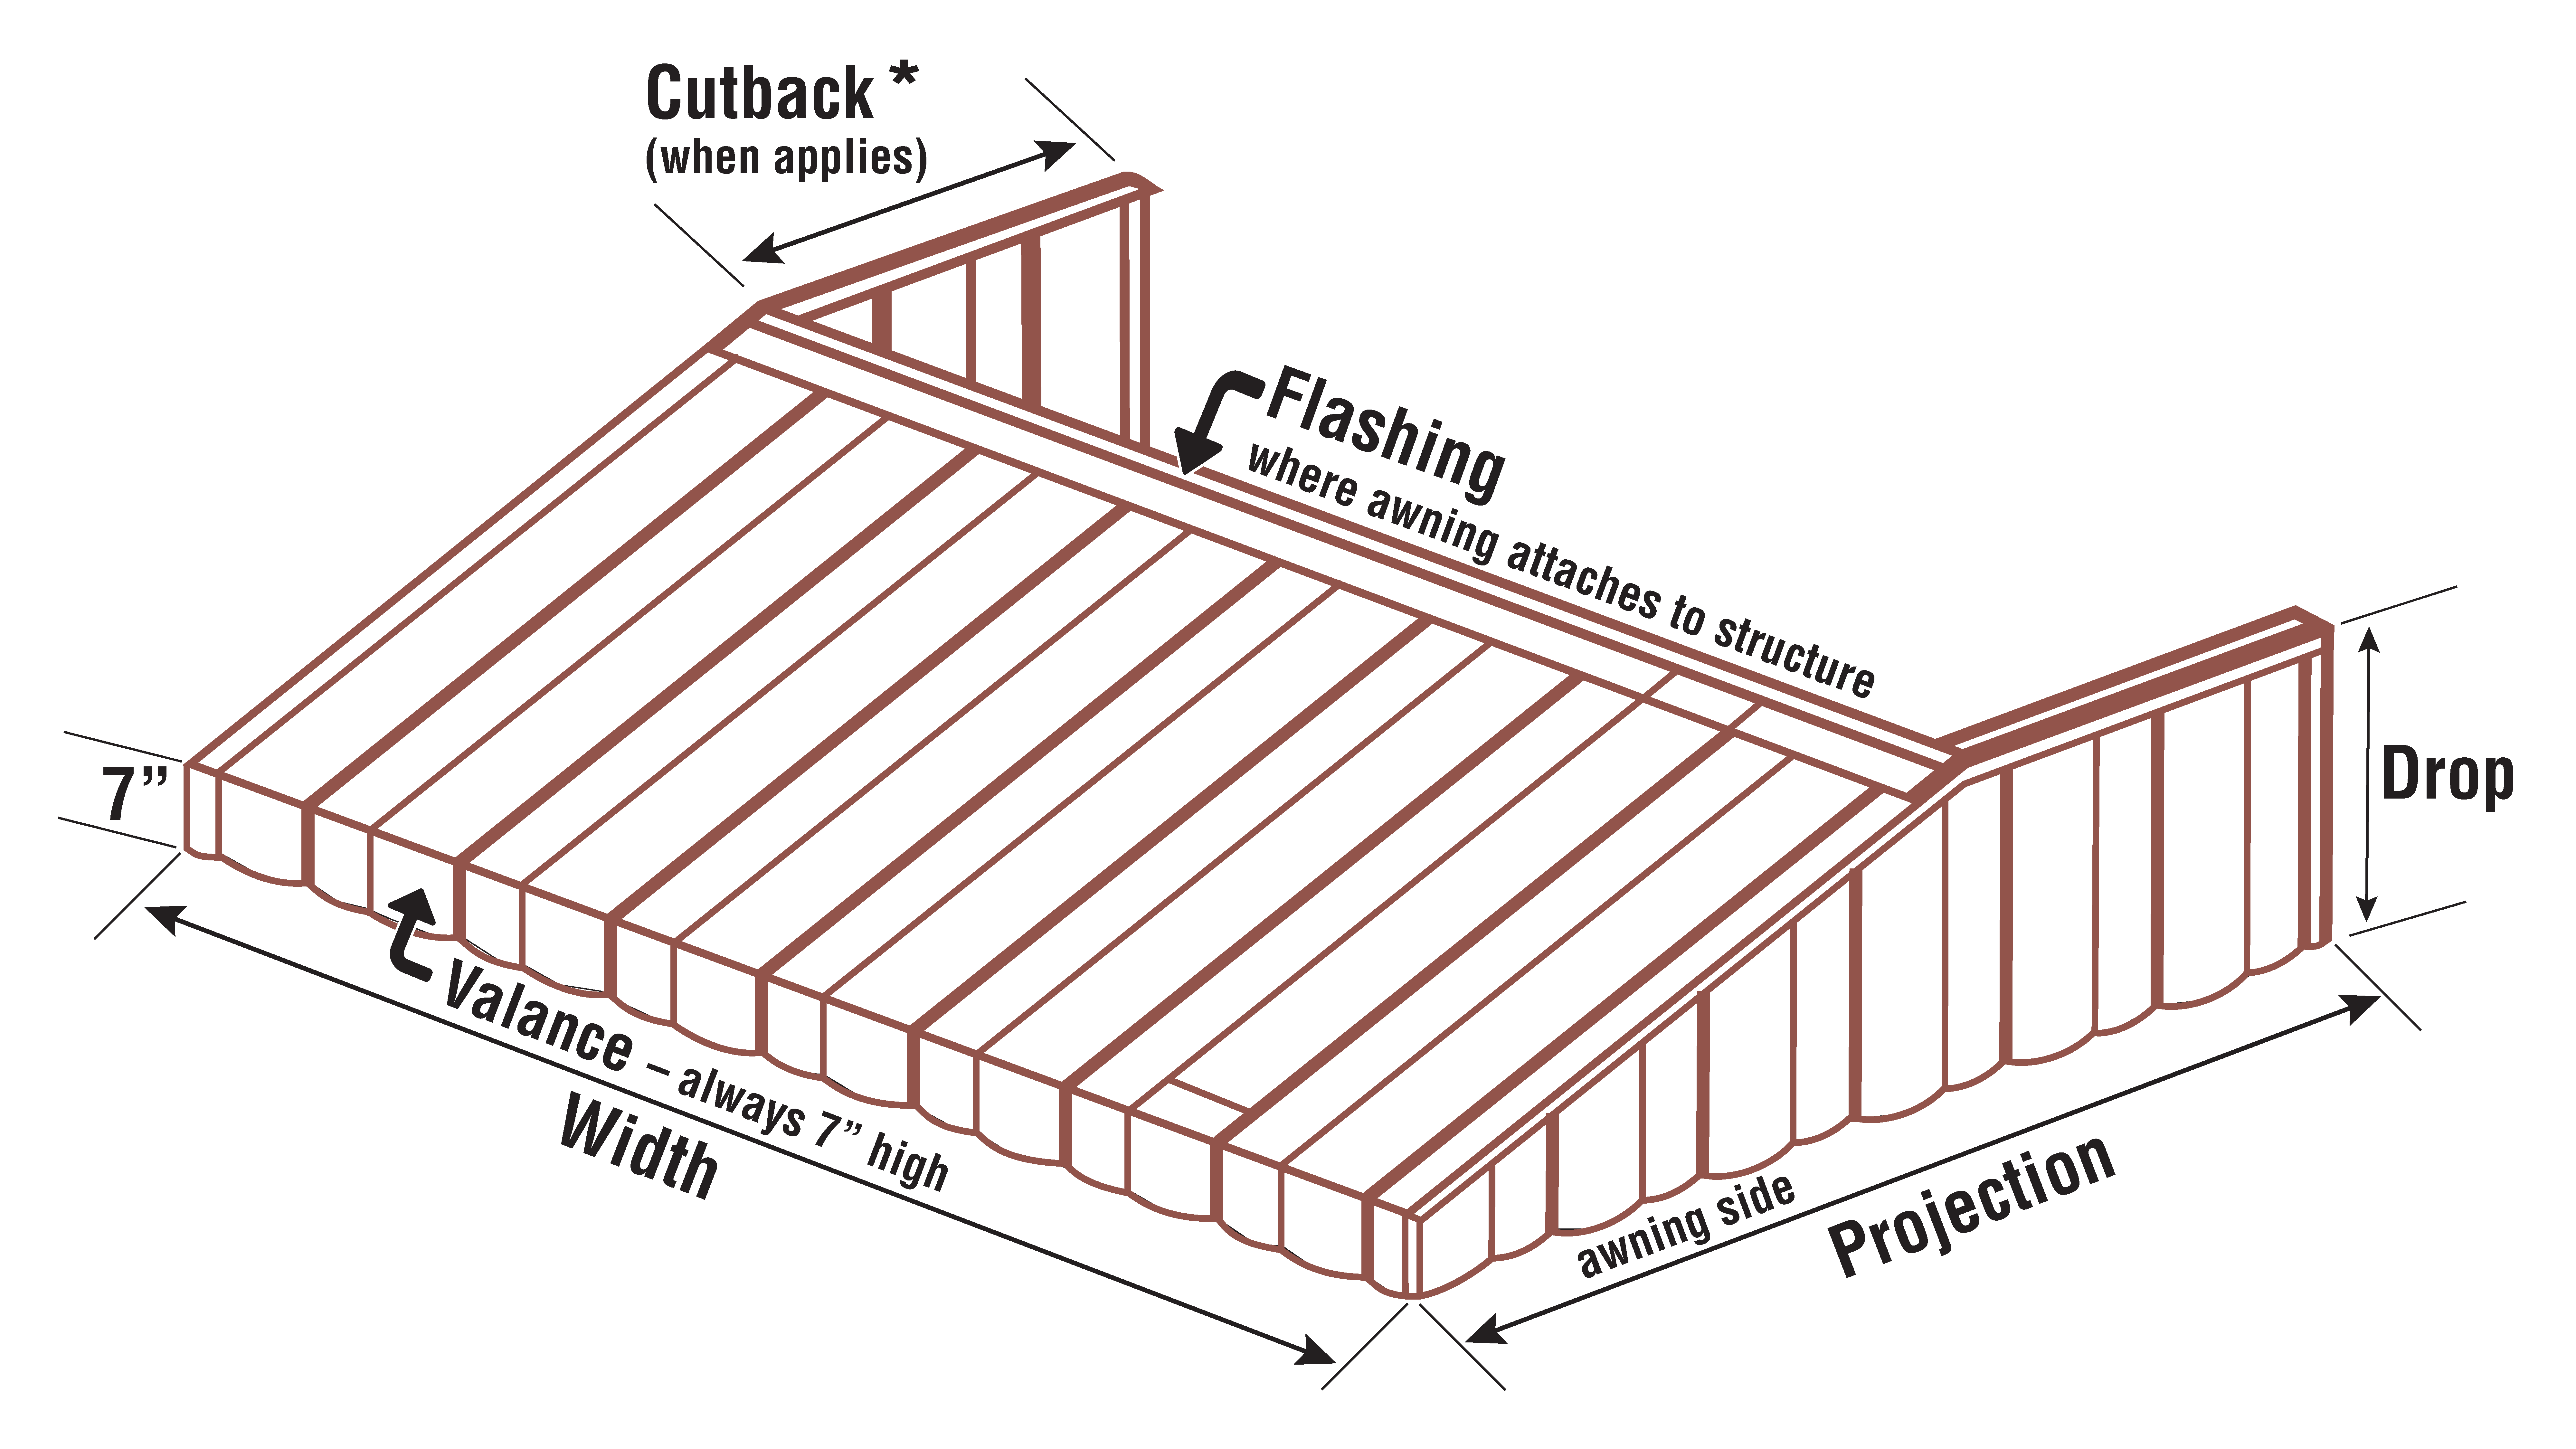 Diagram of a typical awning showing key measurements